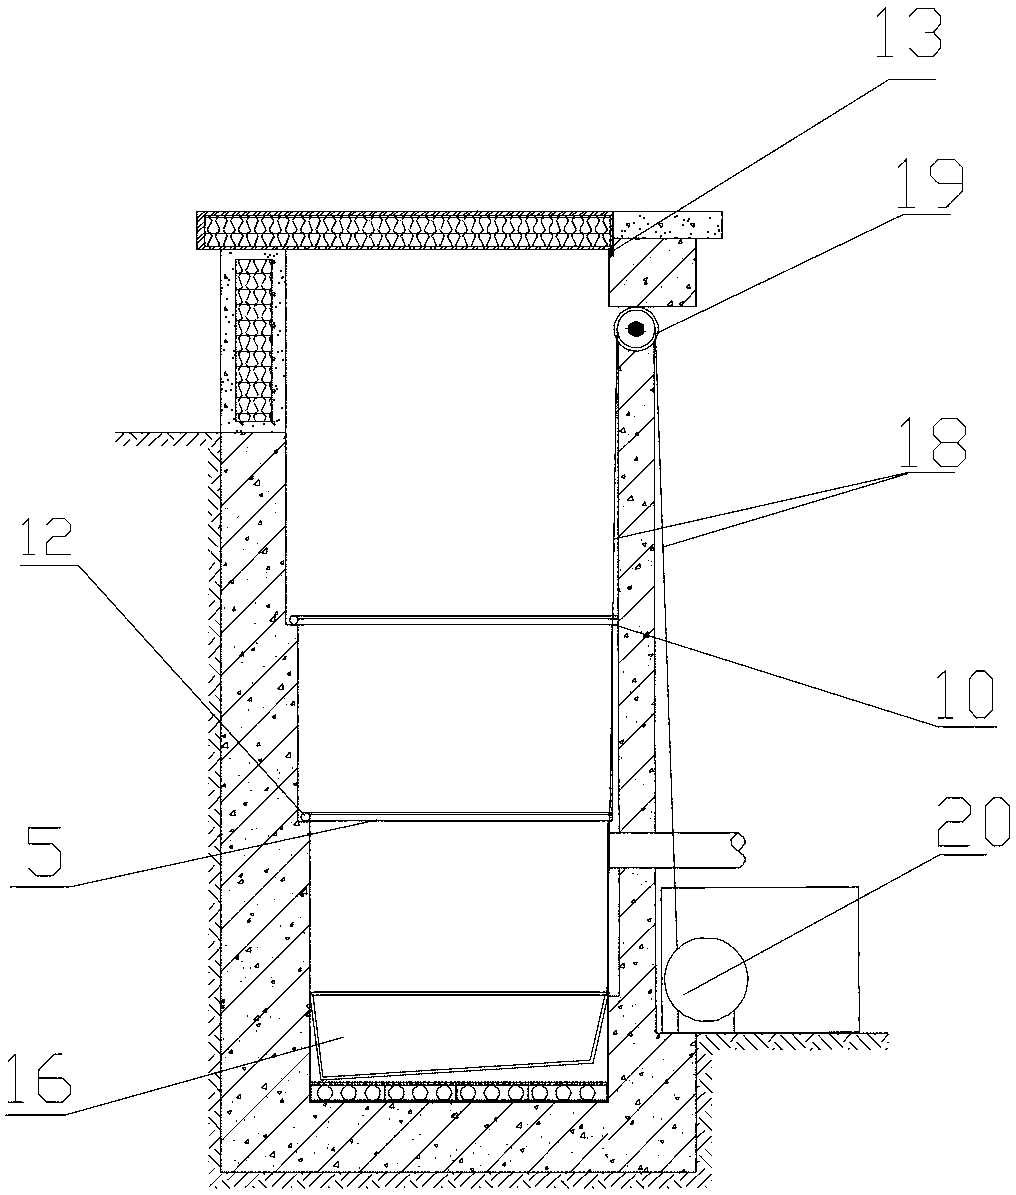 Hot-air circulating two-layered snow melting system and method for recycling accumulated snow